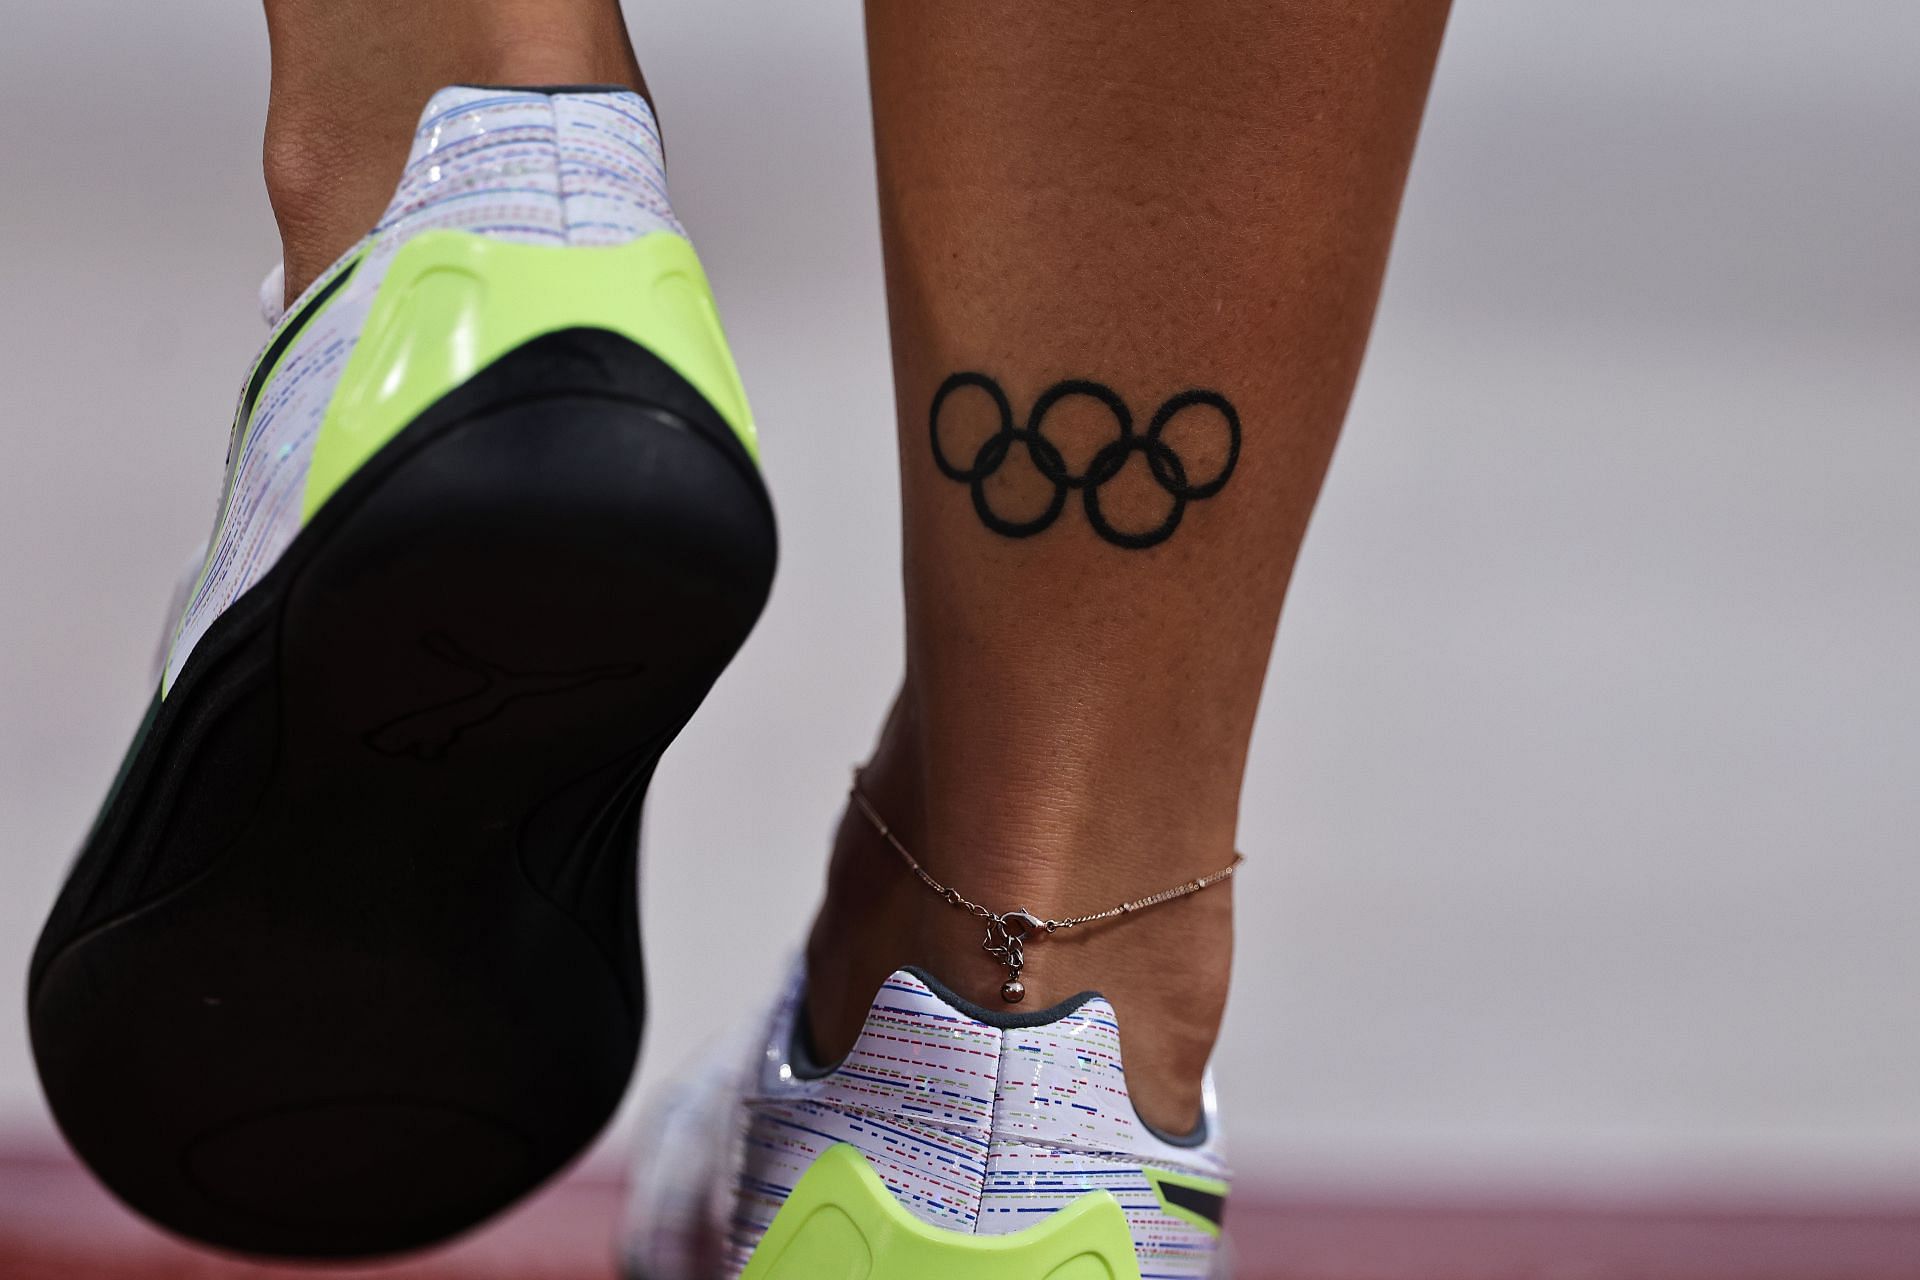 Take a Look: Olympic Tattoos